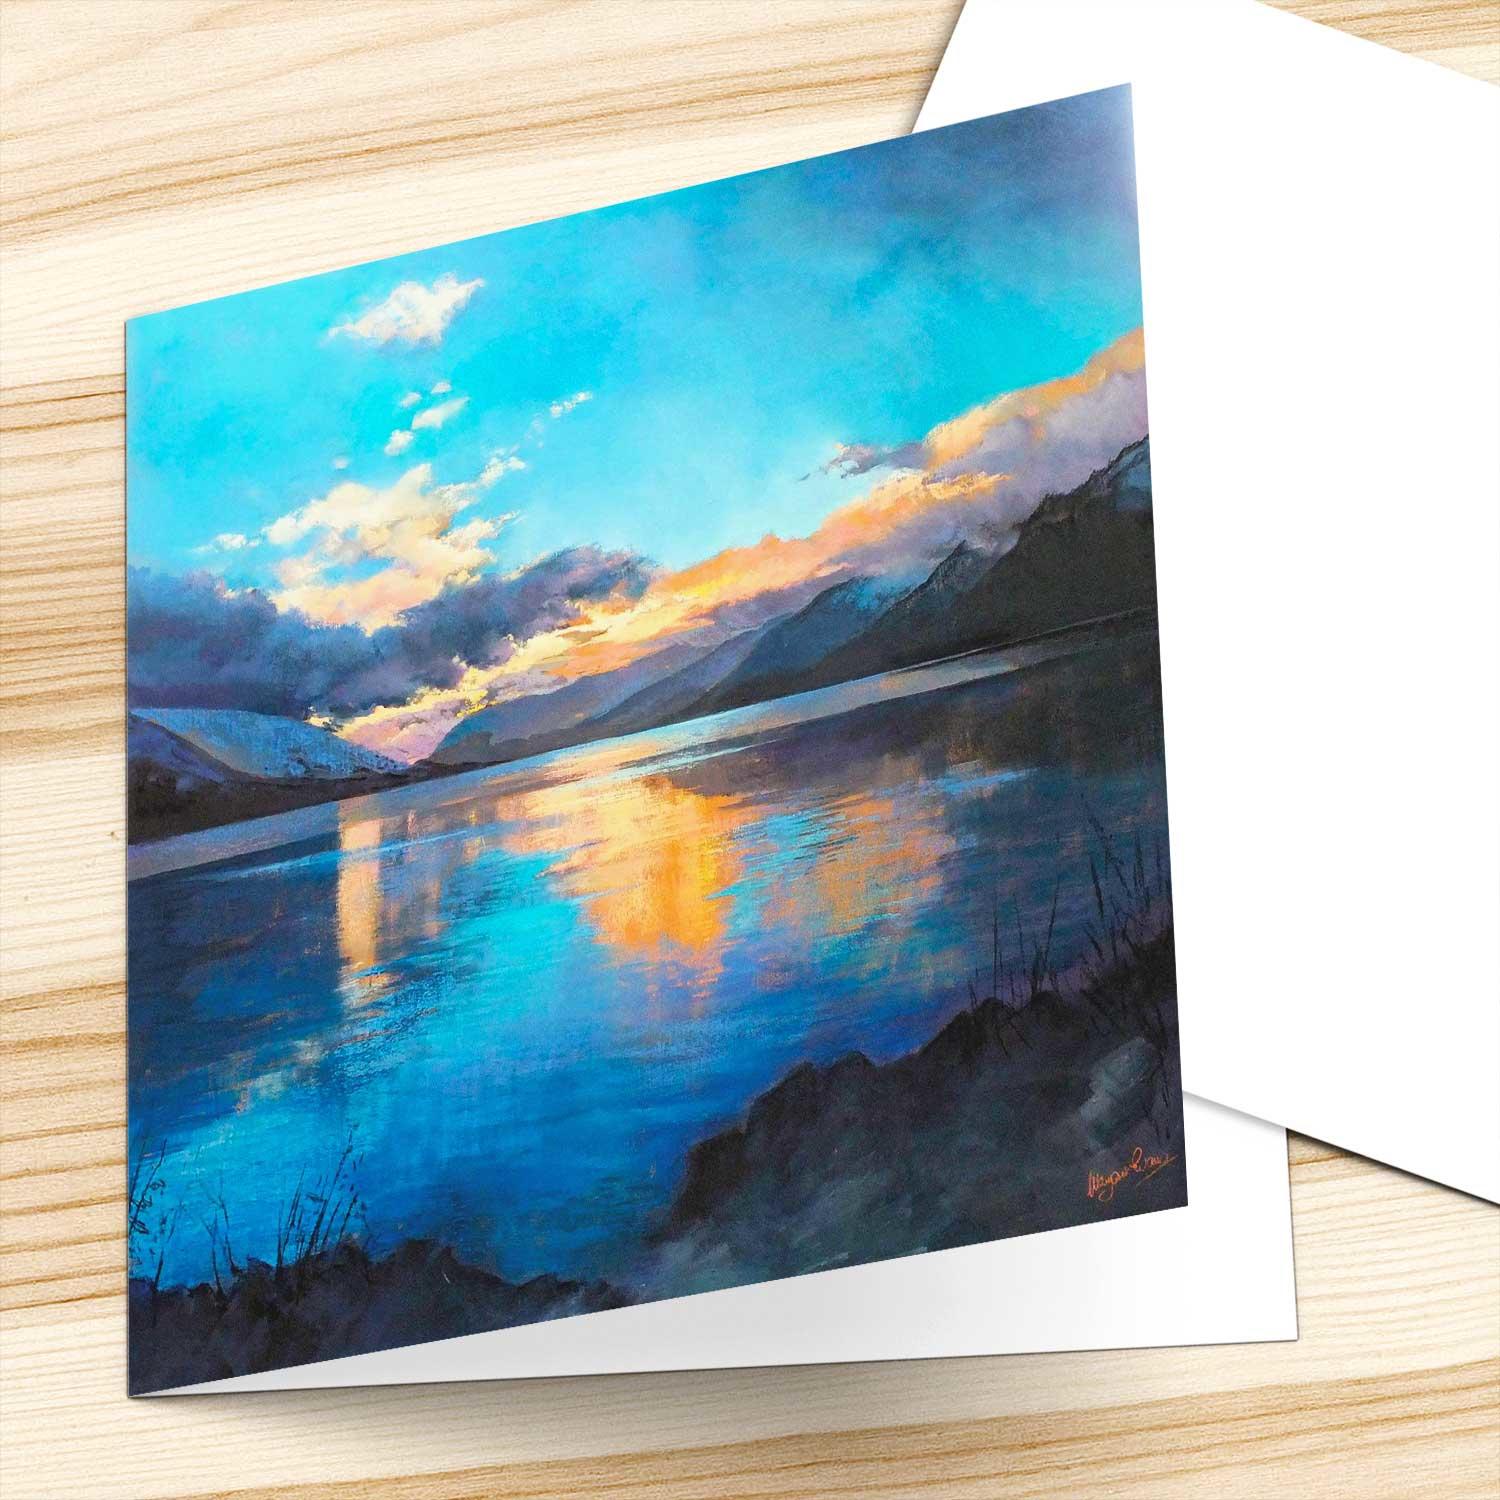 Loch Earn Blues & Golds Greeting Card from an original painting by artist Margaret Evans